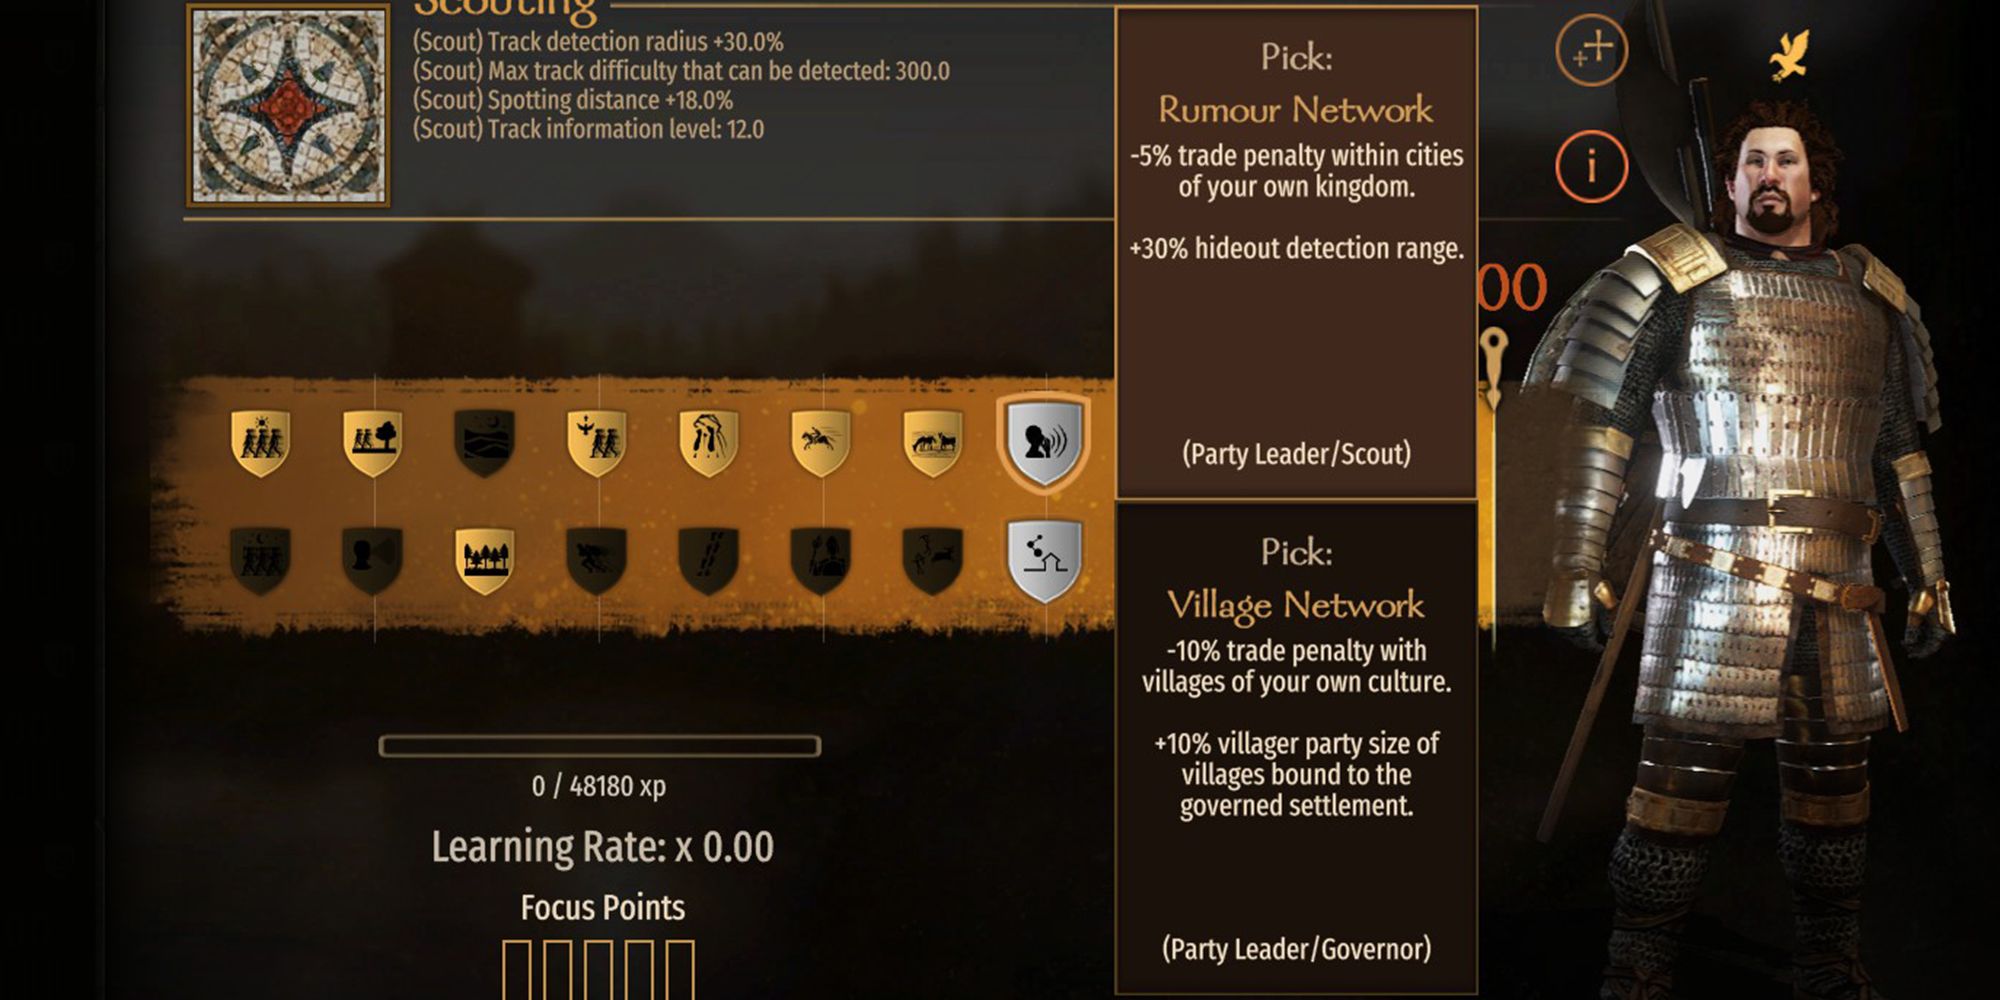 Mount & Blade 2: Bannerlord Rumor Network Perk: -5% trade penalty within cities of your kingdom.  +30% hideout detection range.